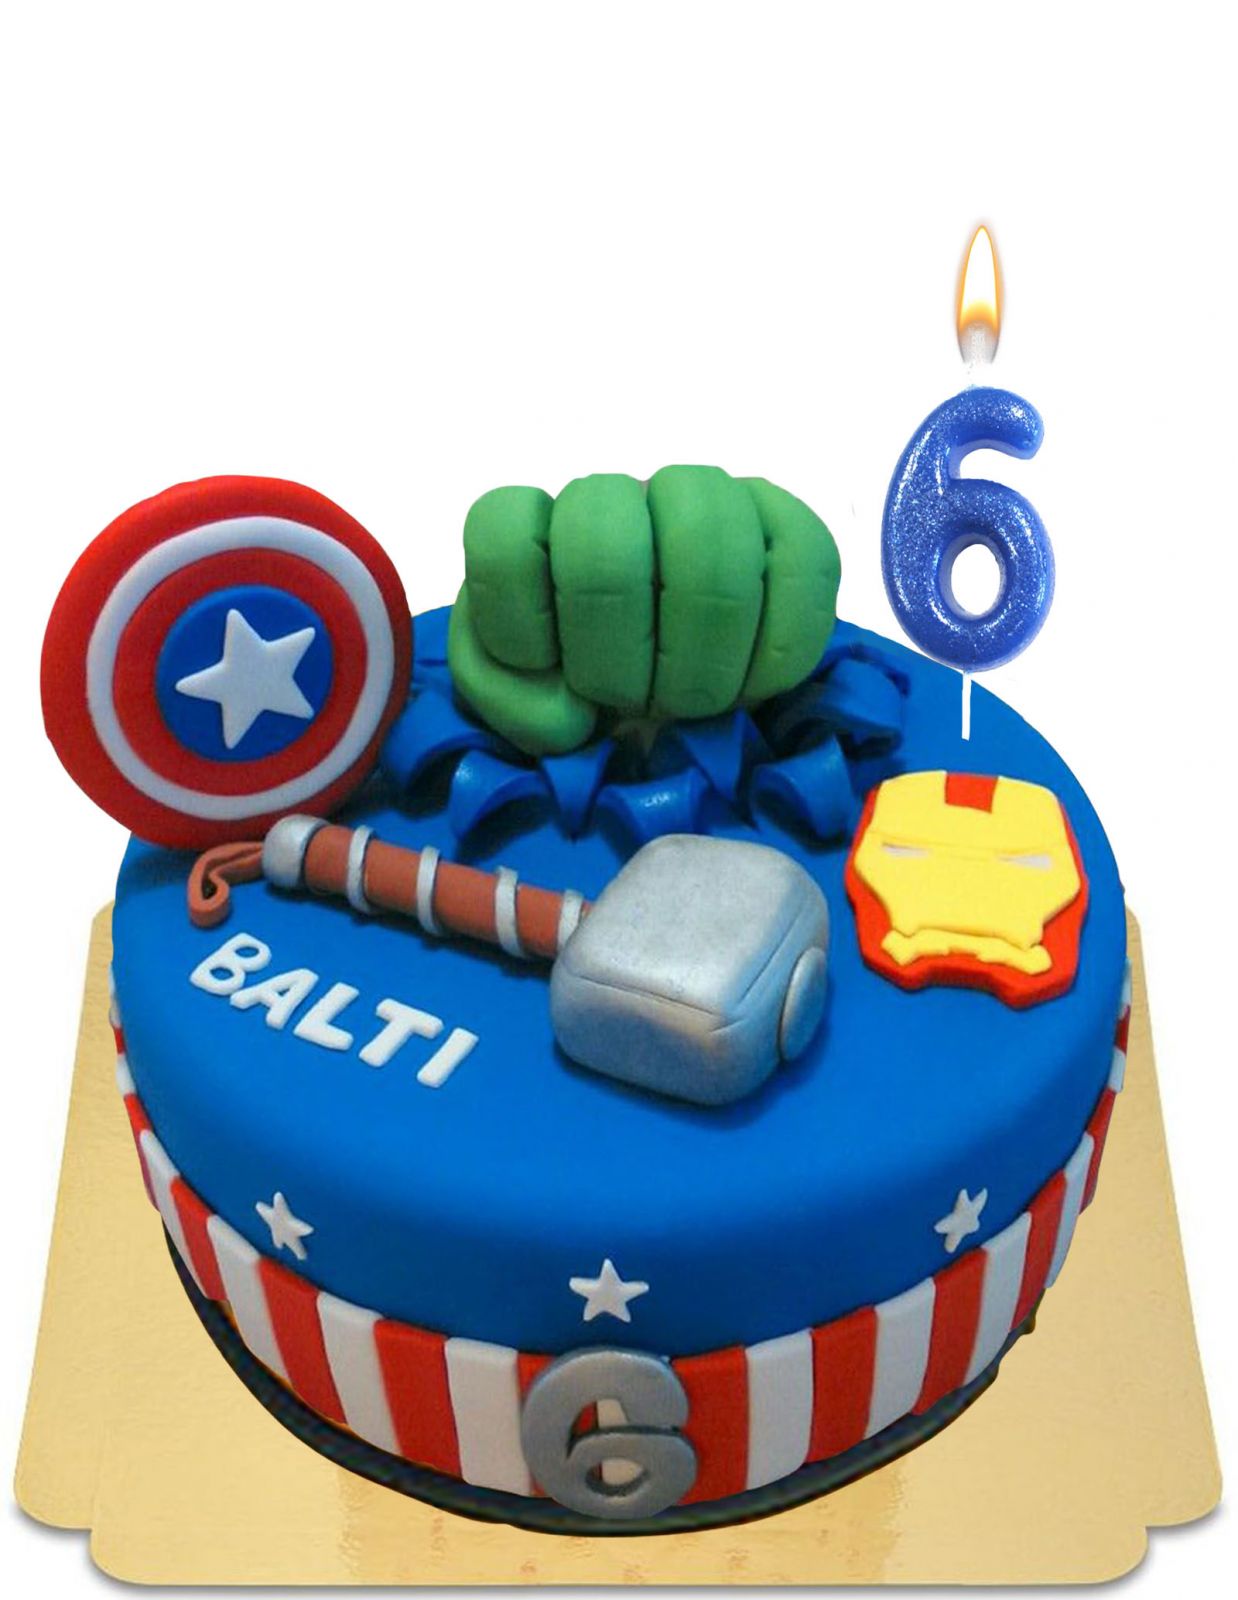 Captain America cake: HERE Discover the most popular ideas ❤️